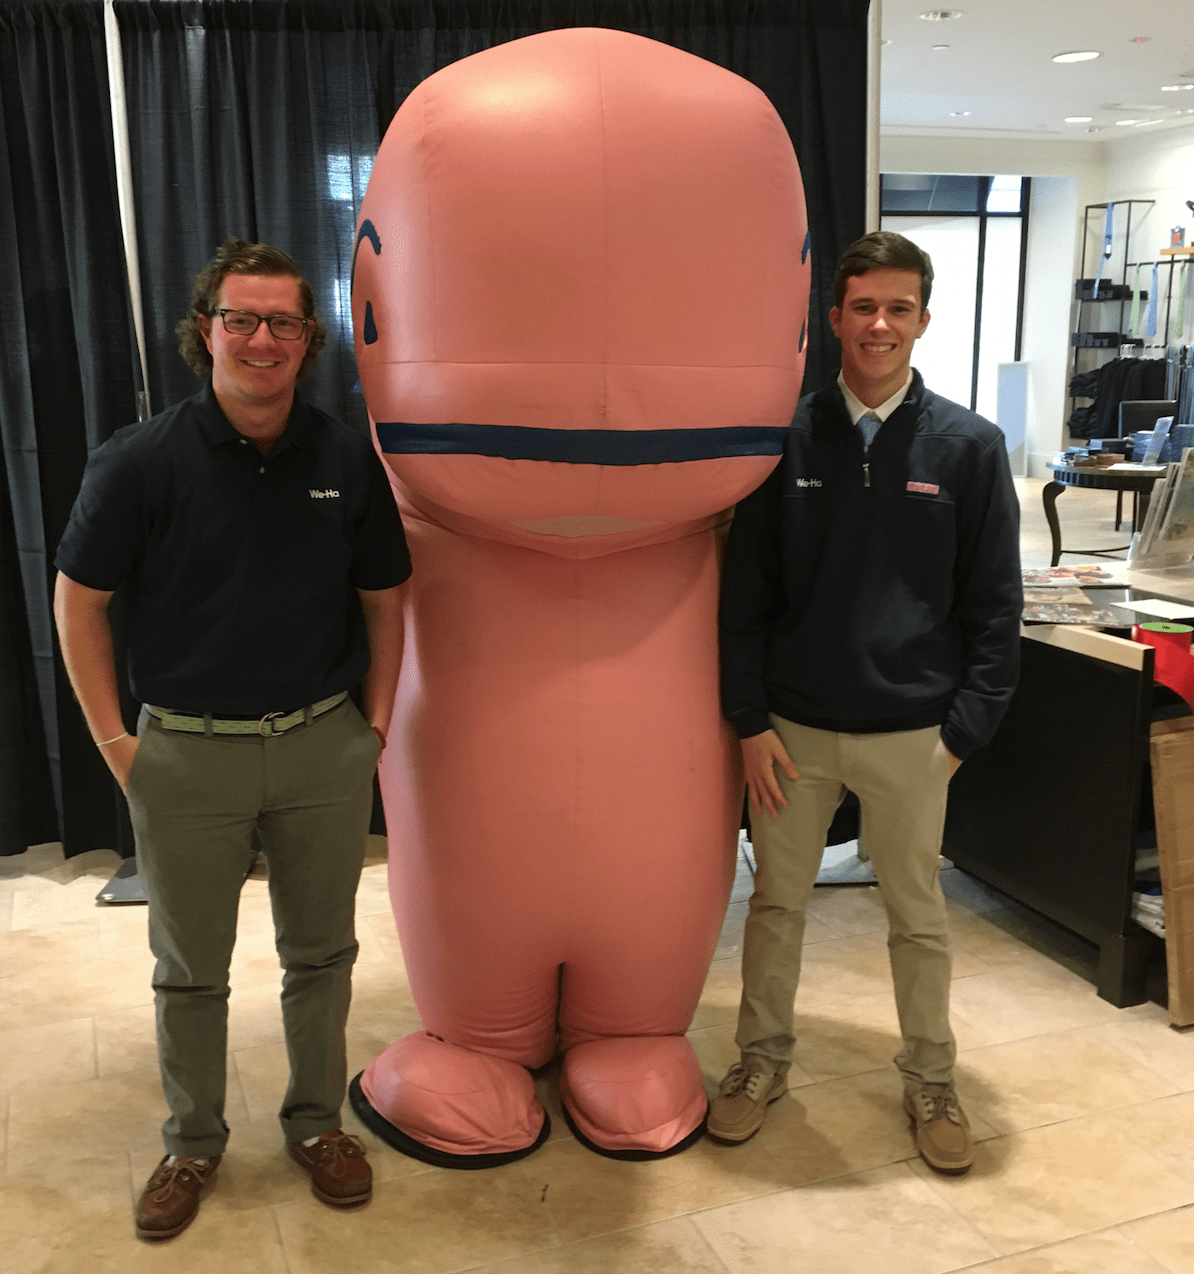 Daniel Lemieux and Dylan Carneiro take a break from working at the We-Ha Pop-Up store to pose with the Vineyard Vines Whale Mascot. Photo credit: Joy Taylor